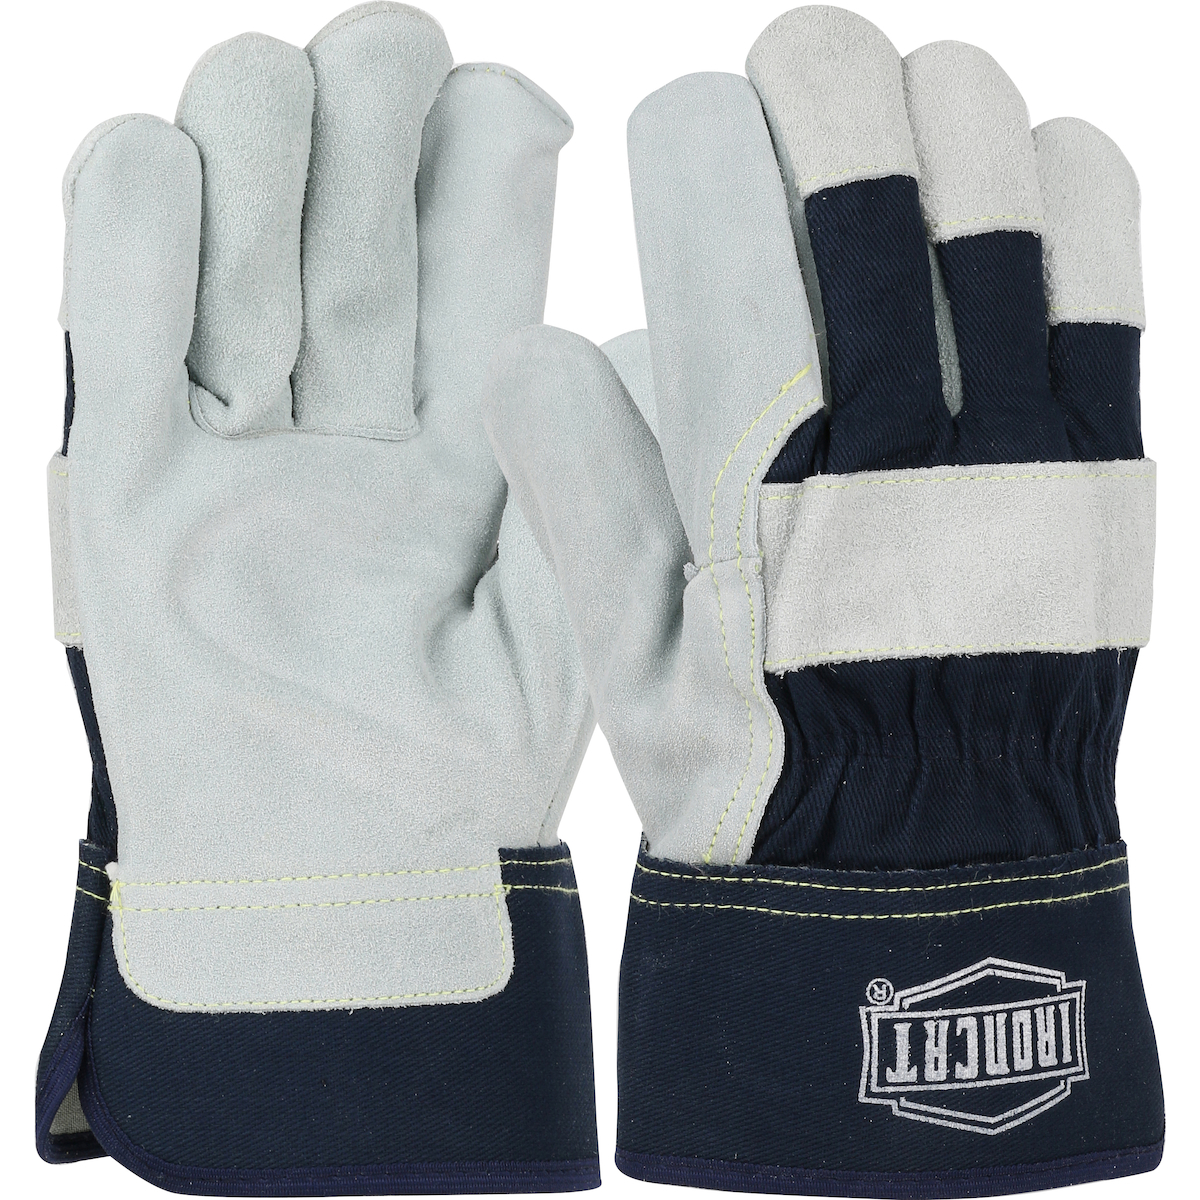 Ironcat® Premium Side Split Cowhide Leather Palm Glove with Canvas Back and Aramid Stitching - Gloves